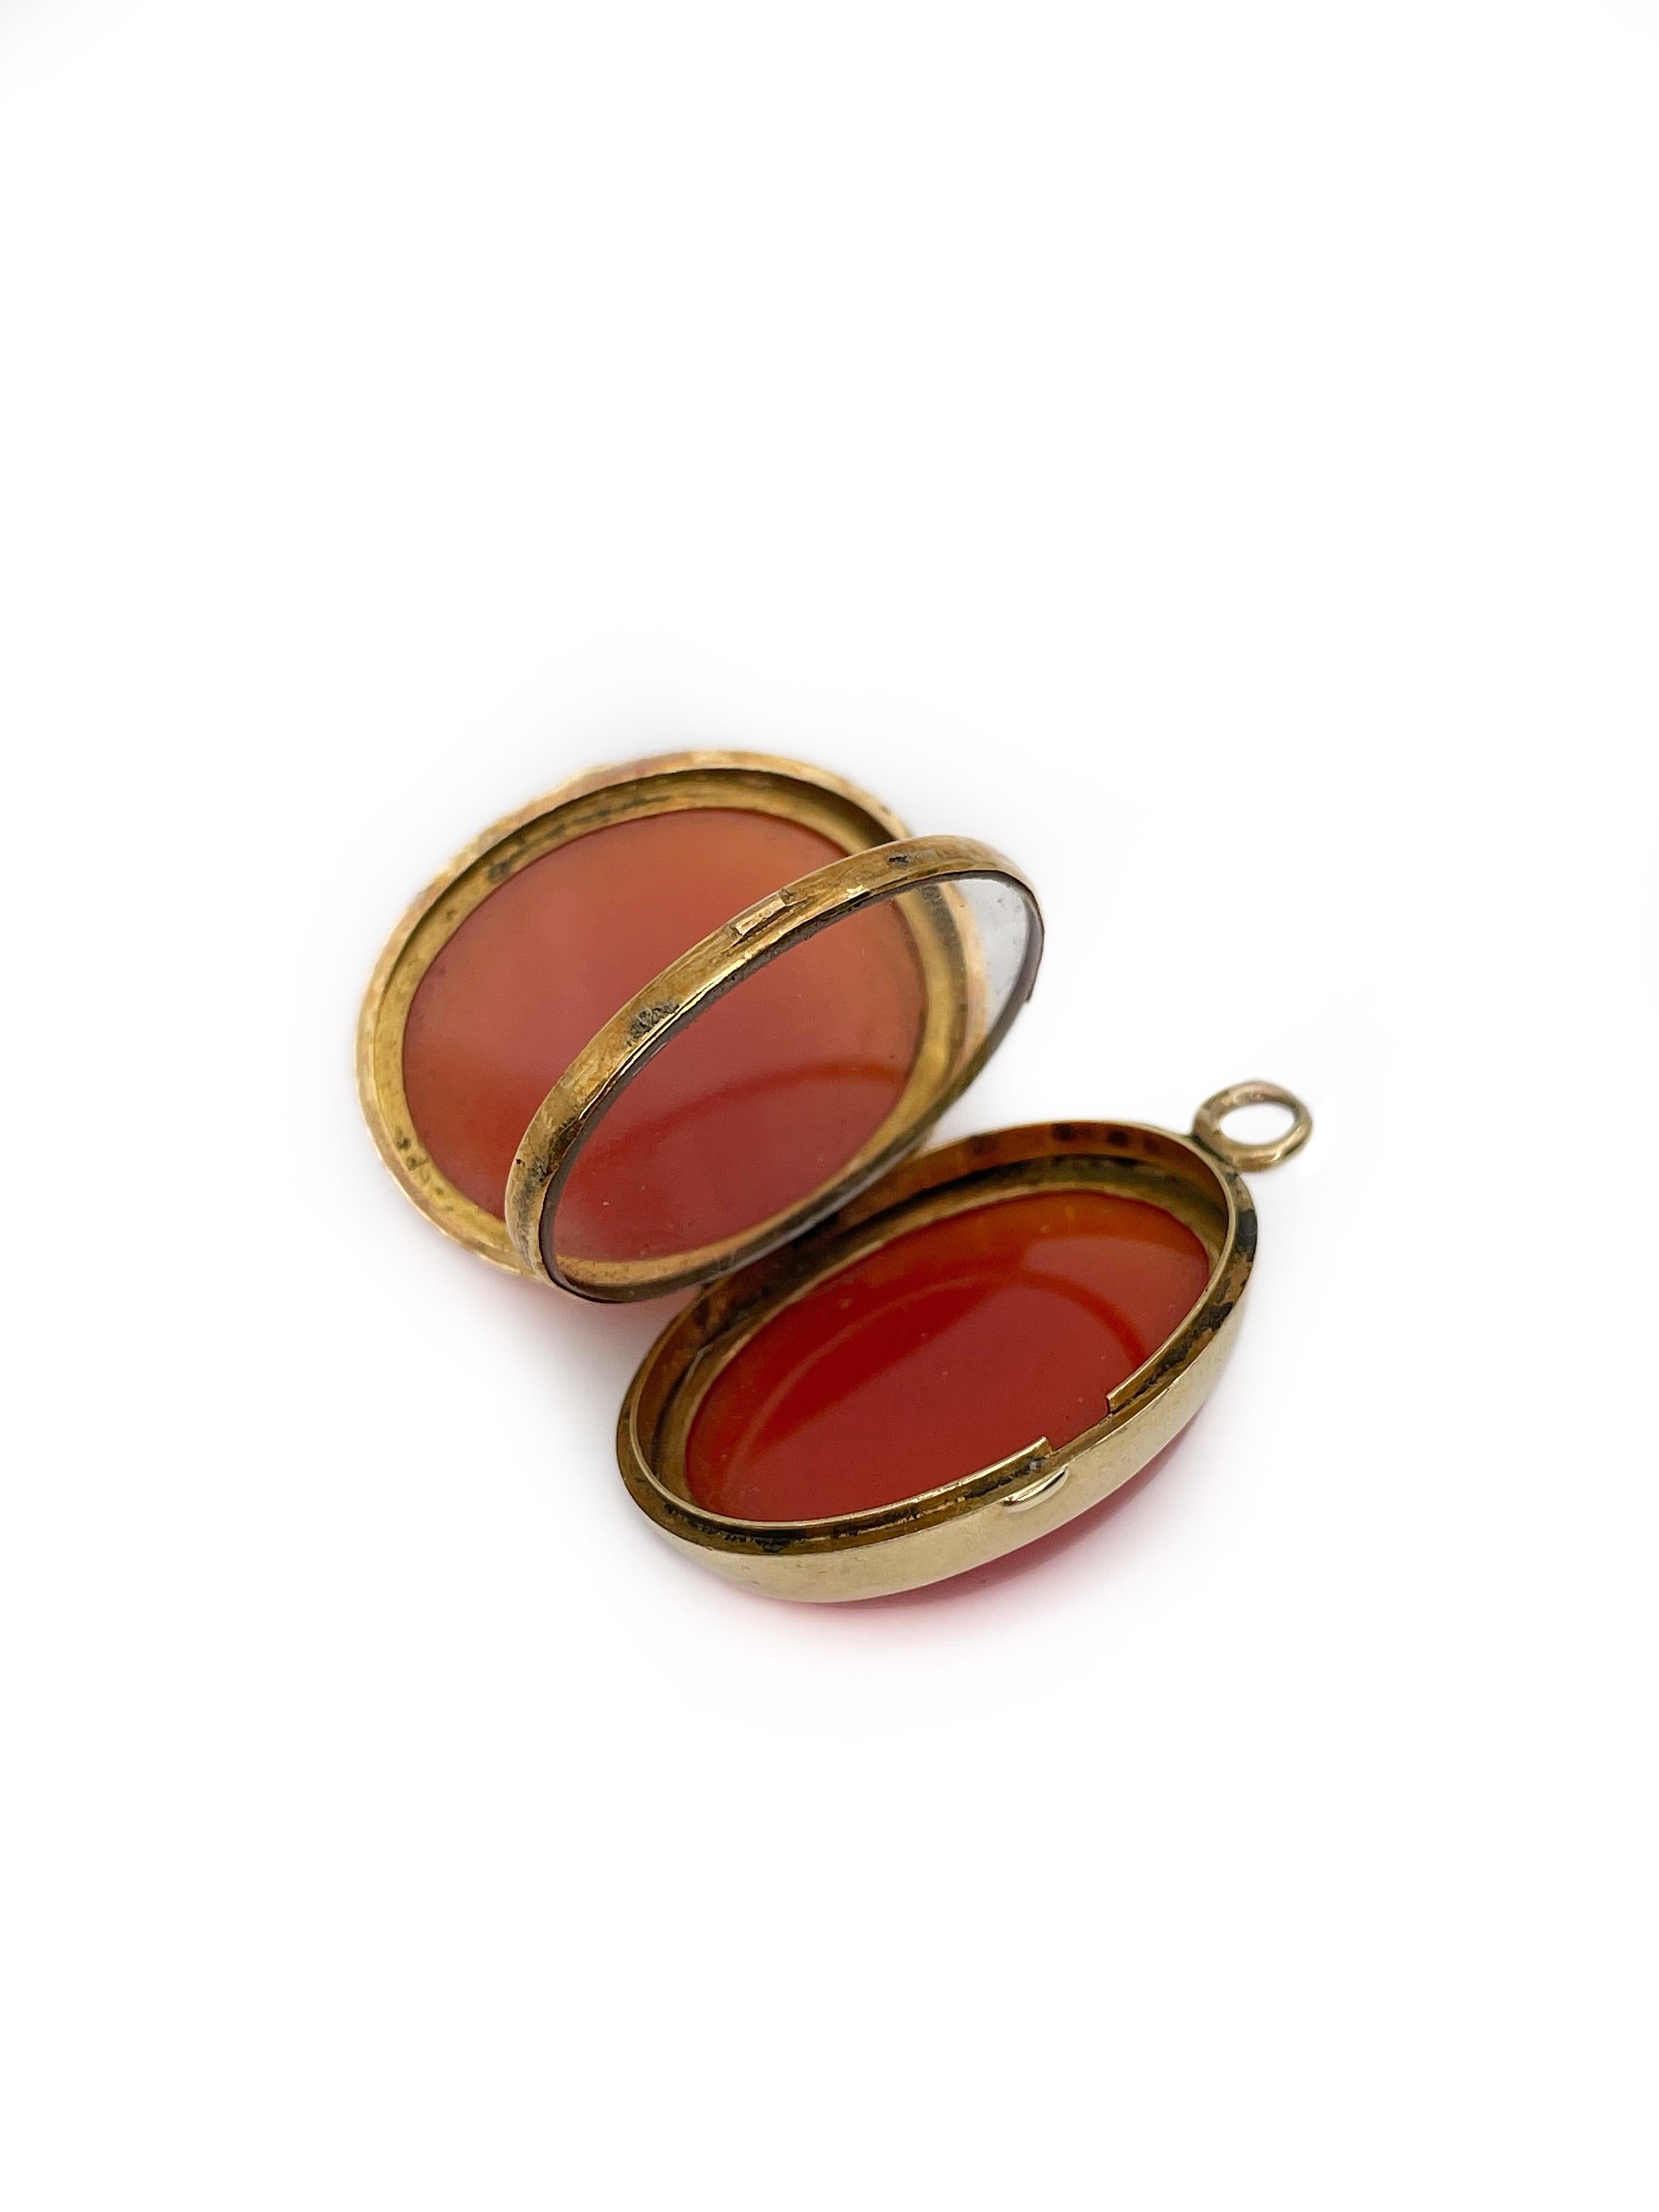 This is a unique antique locket crafted in 14K gold. The piece is made of two cabochon cut carnelians. It has a glass frame and space for pictures inside. 

Weight: 10.38g
Length: ~3cm
Width: ~1.8cm